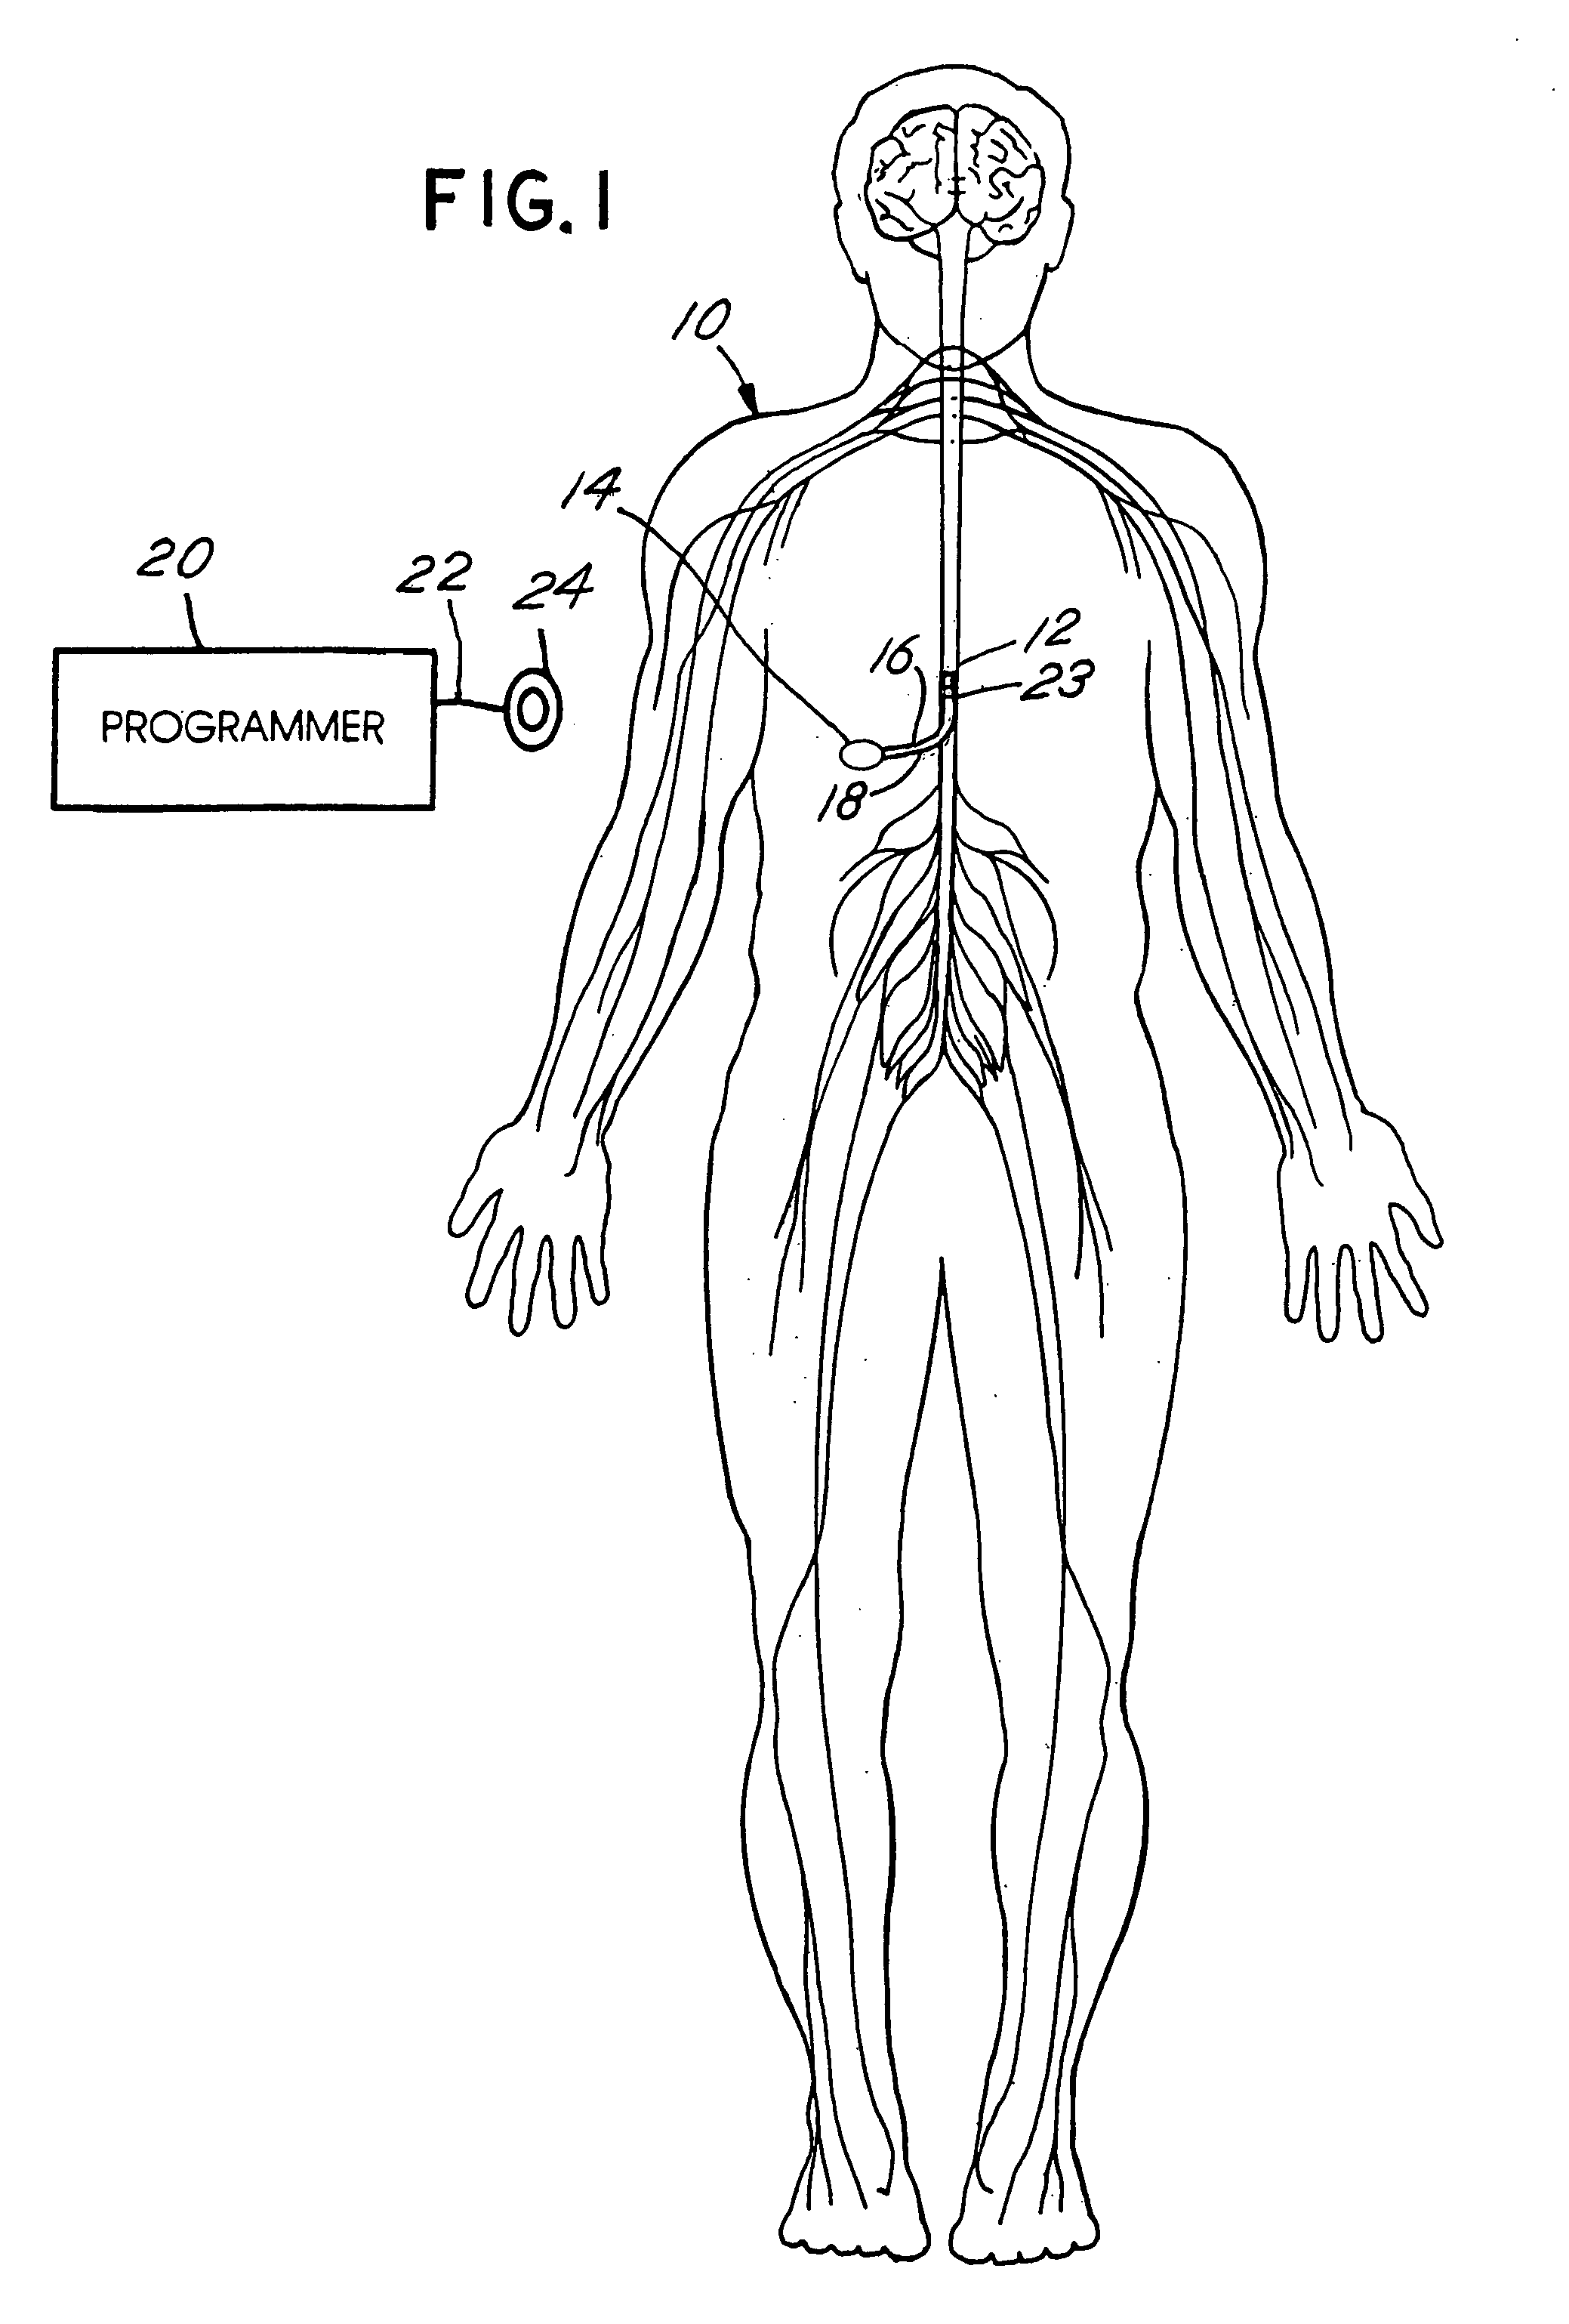 Techniques for positioning therapy delivery elements within a spinal cord or brain